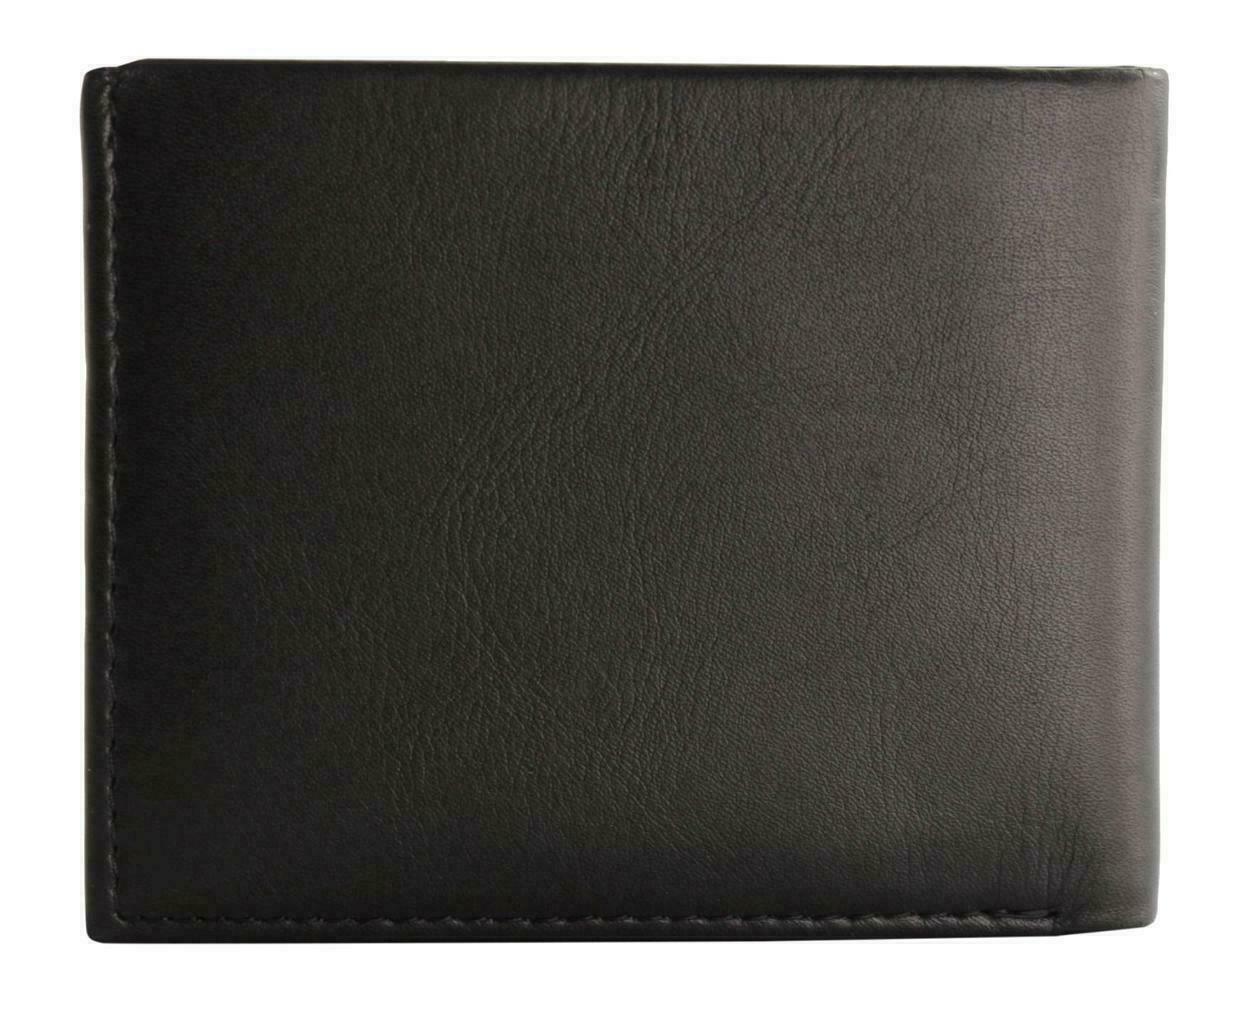 Guess Men's Premium Leather Credit Card ID Billfold Wallet Black